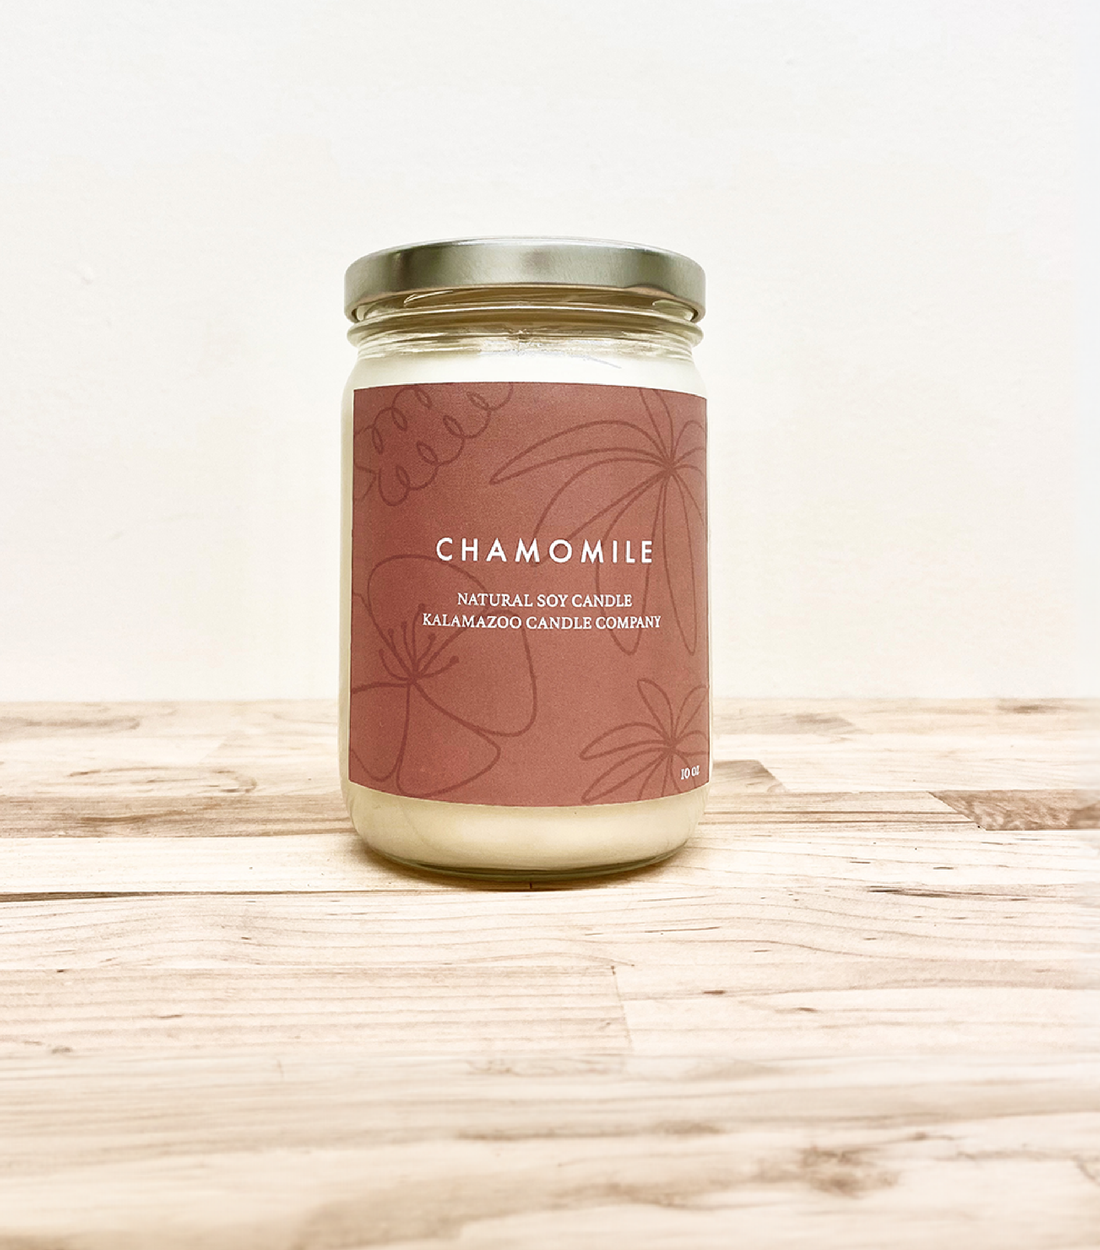 Fragrant chamomile and jasmine fill this candle with a calming essence. Crushed lavender and sparkling orange bring life and vibrance to the room where it slowly burns. Made in Kalamazoo, MI USA.